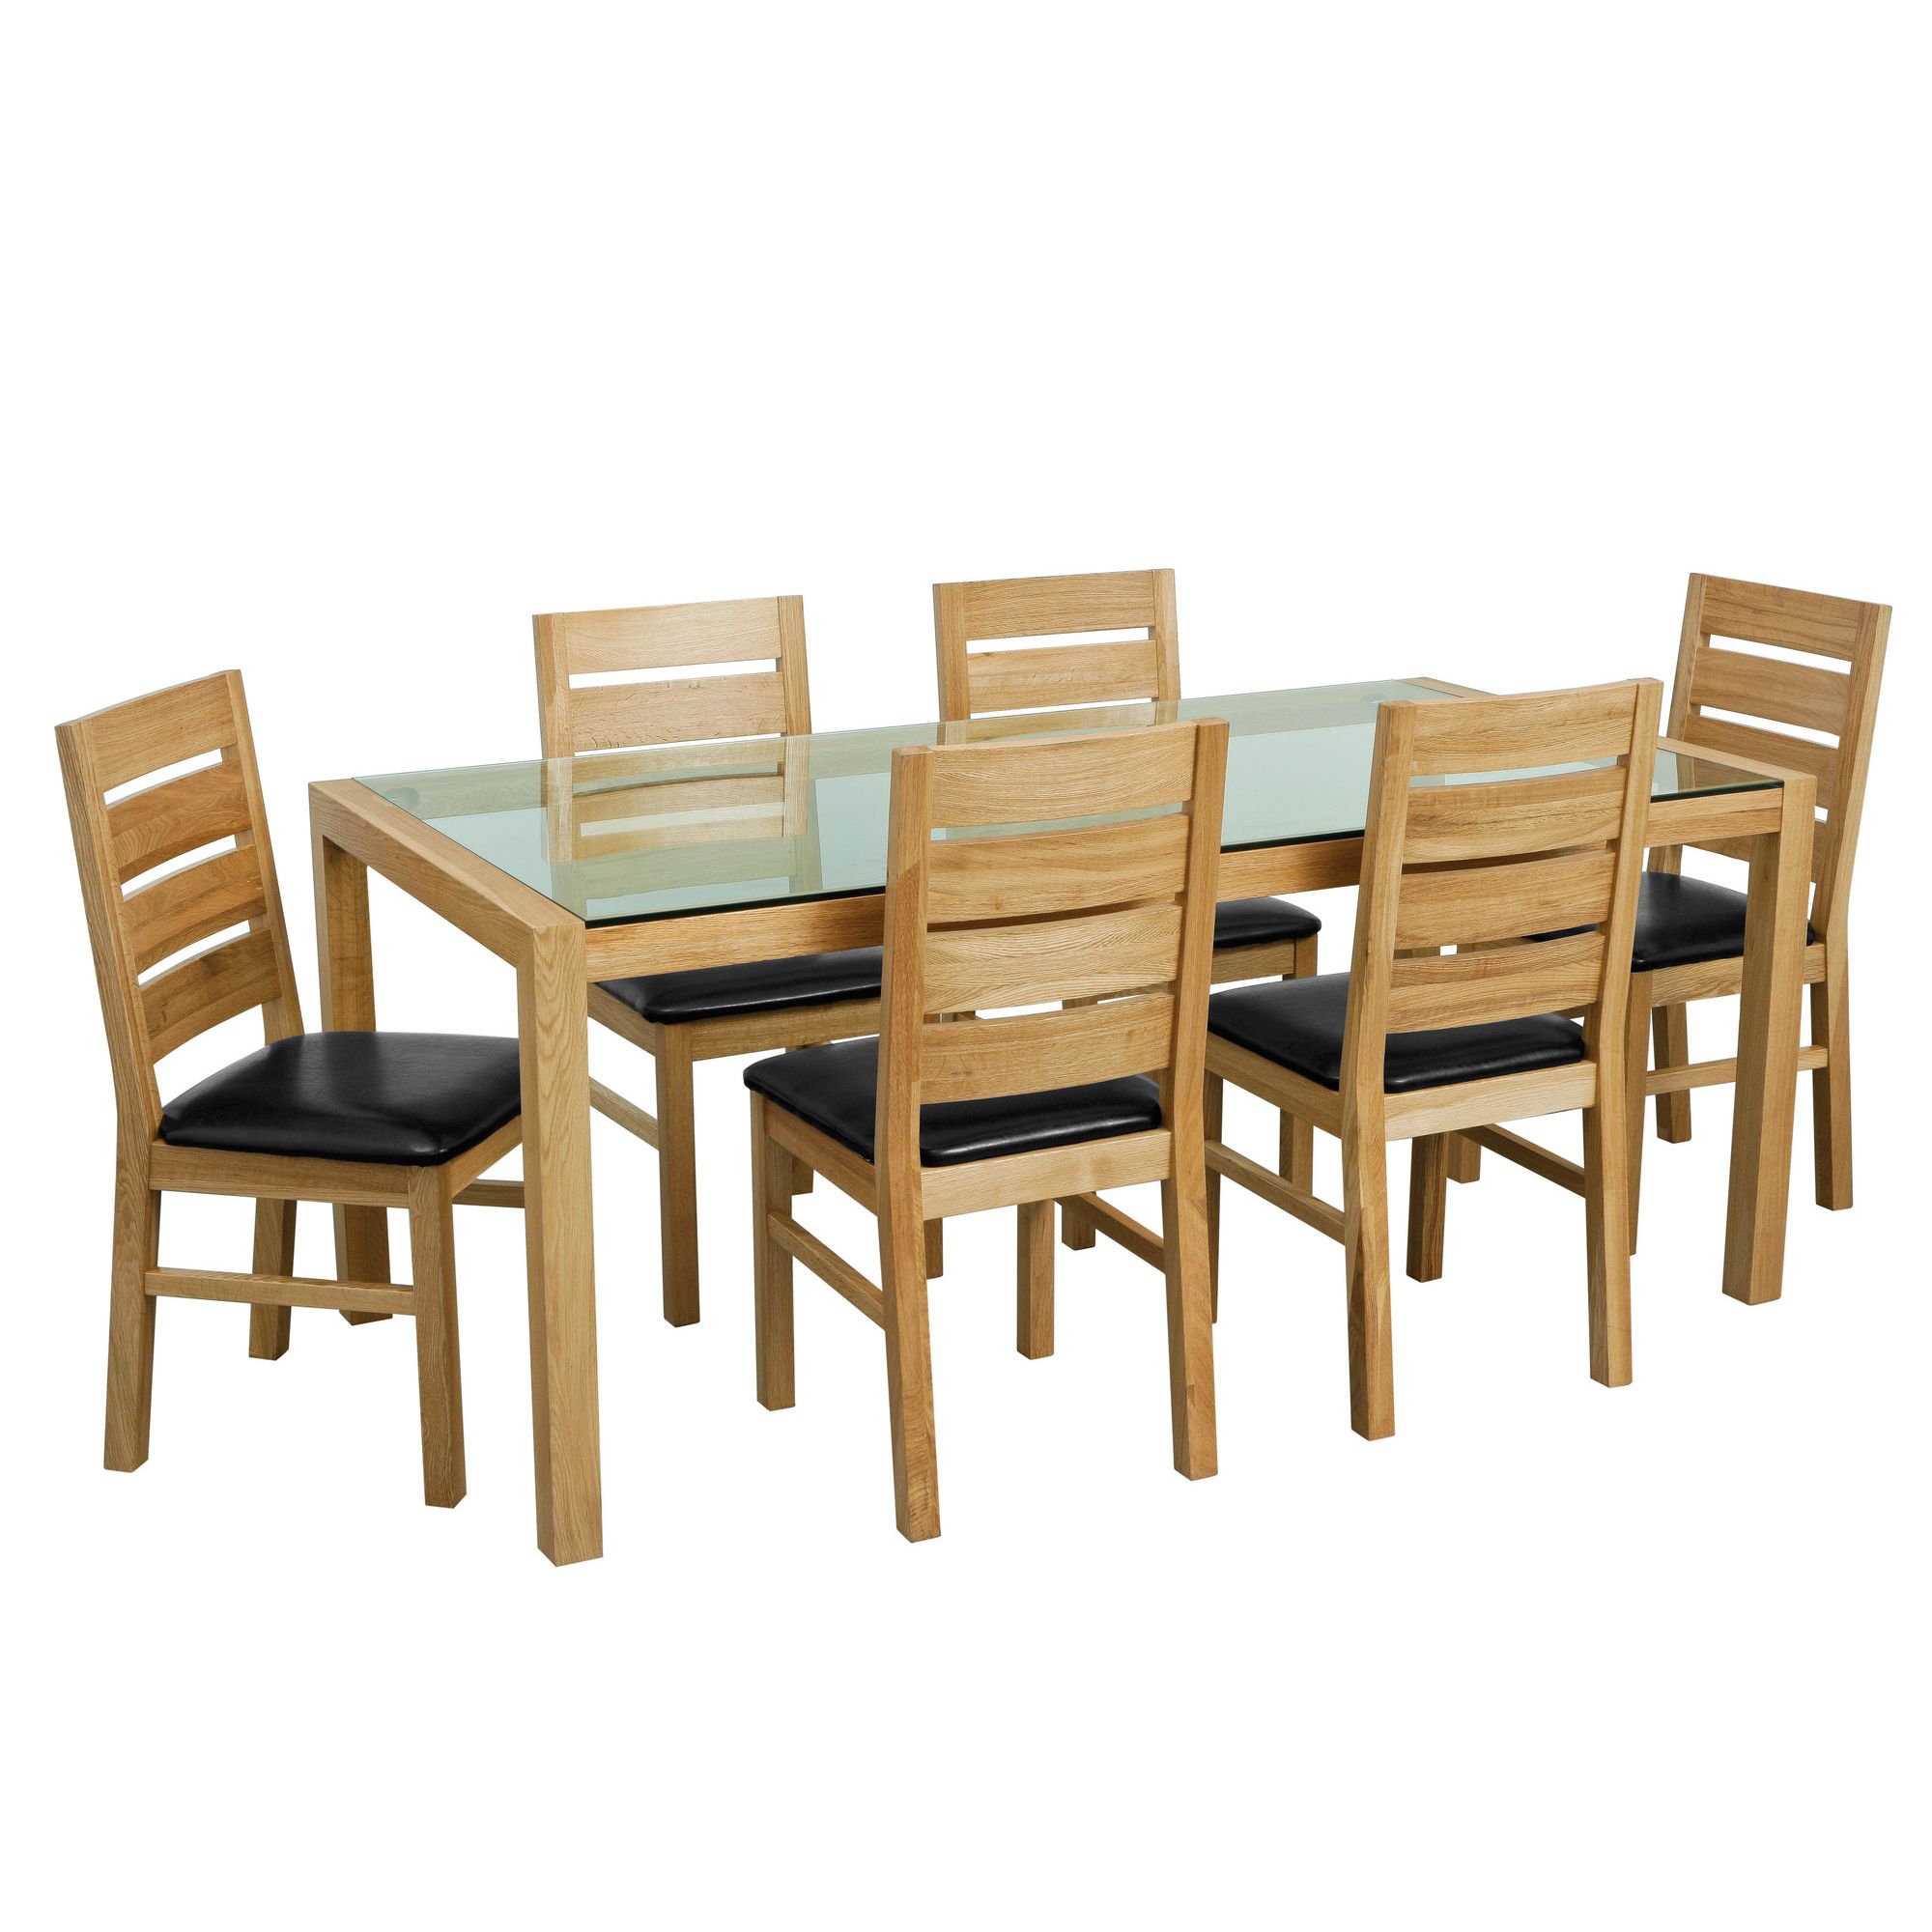 Premier Housewares 7 Piece Solid Oak Dining Set with Glass Top at Tesco Direct